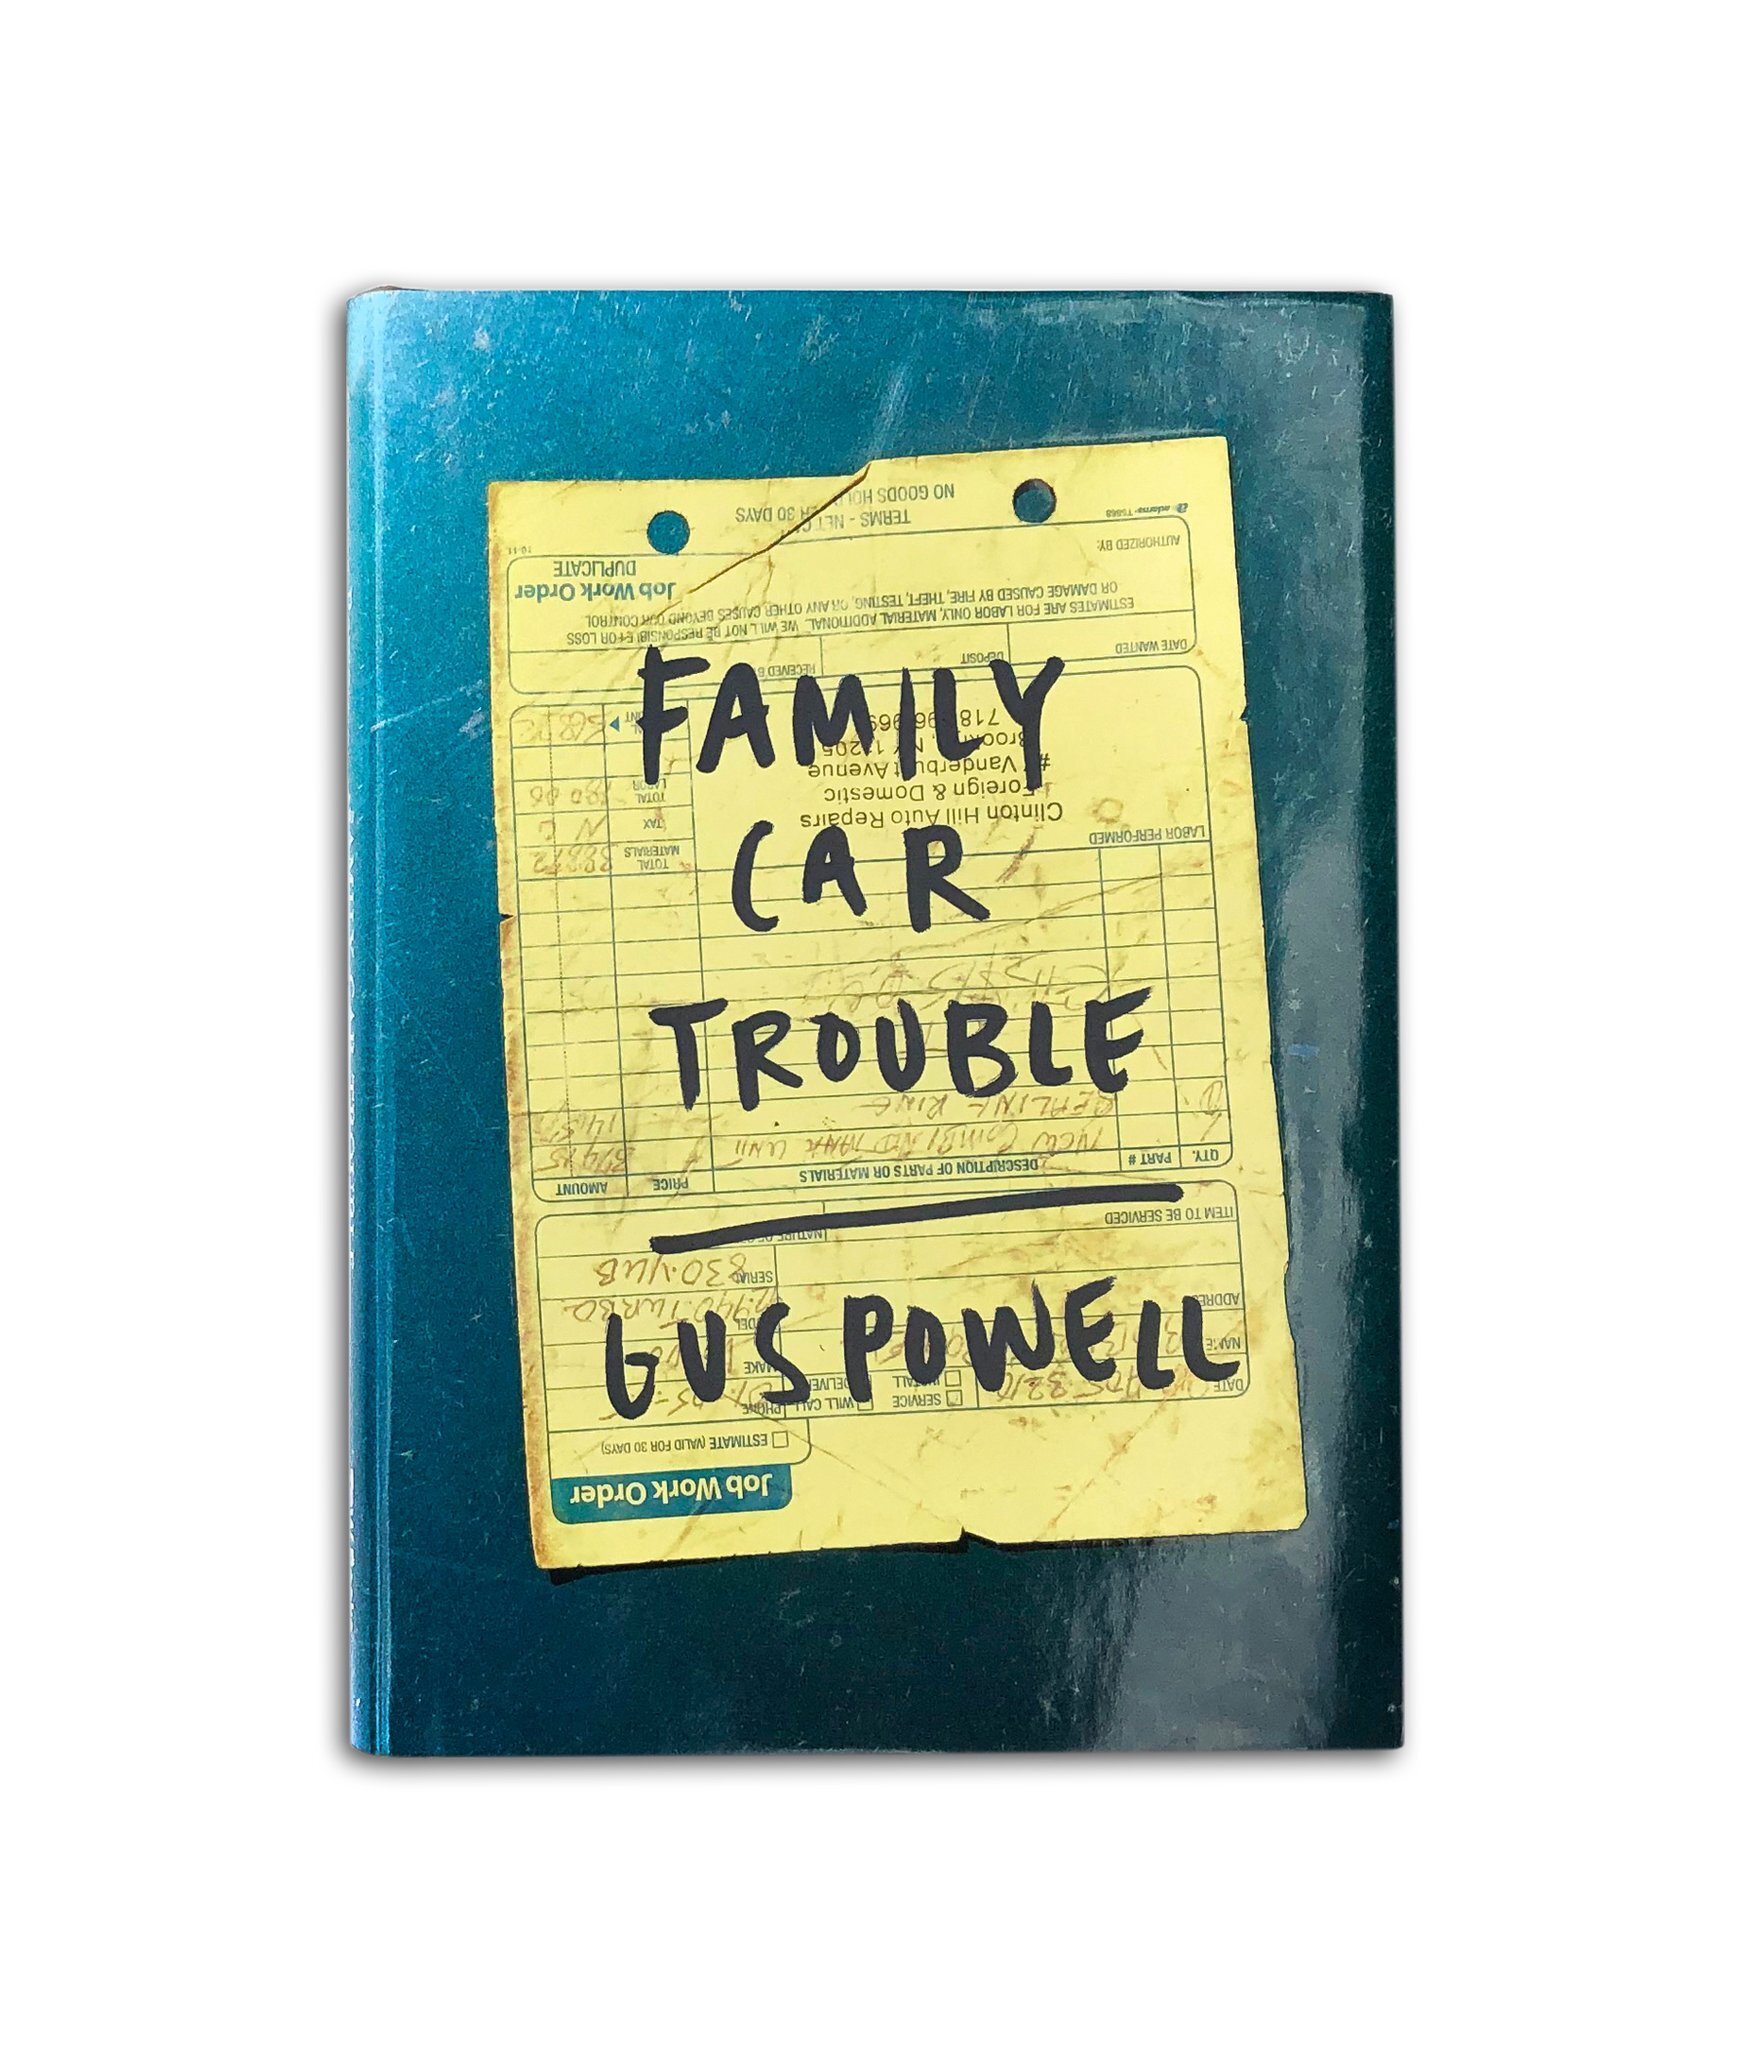 TBW-Books-Family-Car-Trouble-Gus-Powell-Cover-Front-Mock-05_2d1d86f7-3cff-4d2c-811c-8a11bf5dbce5_2048x2048.jpg